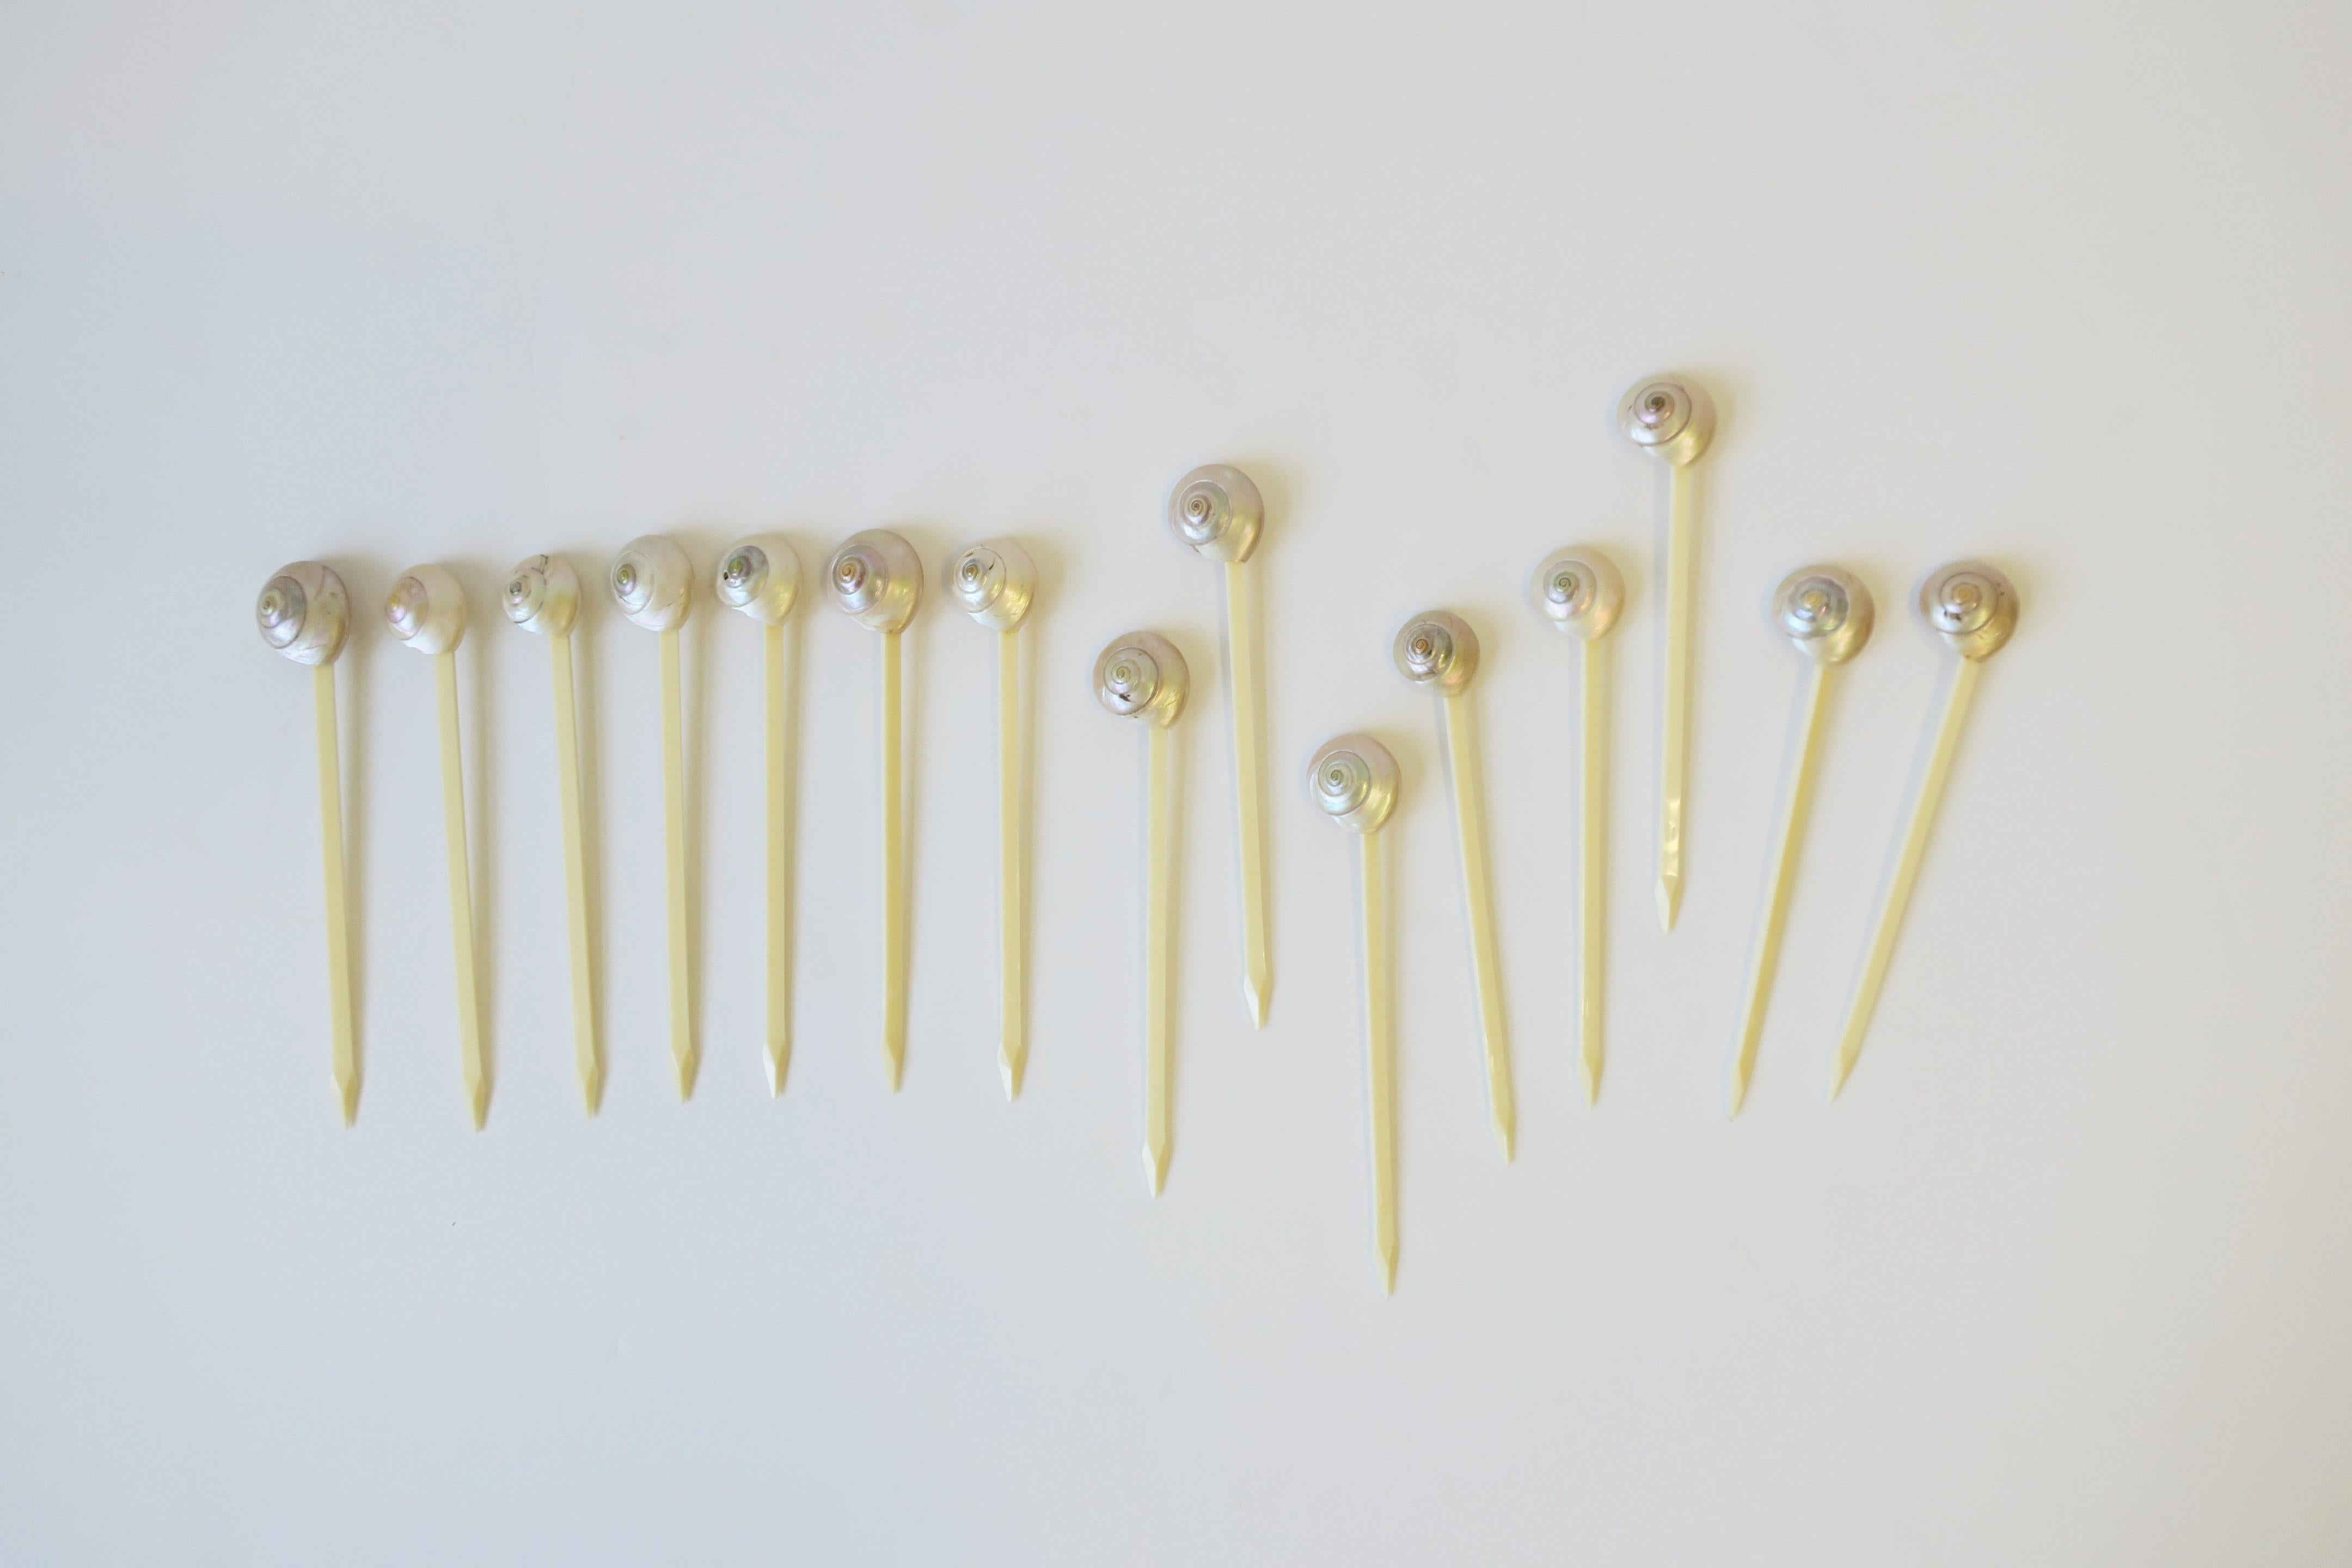 A beautiful set of fifteen (15) real natural mother of pearl seashell cocktail stirrers or appetizer picks, circa late-20th century, USA. Made in the U.S.A. as marked on each, please see image #12. A great addition to any party, dinner, bar, bar